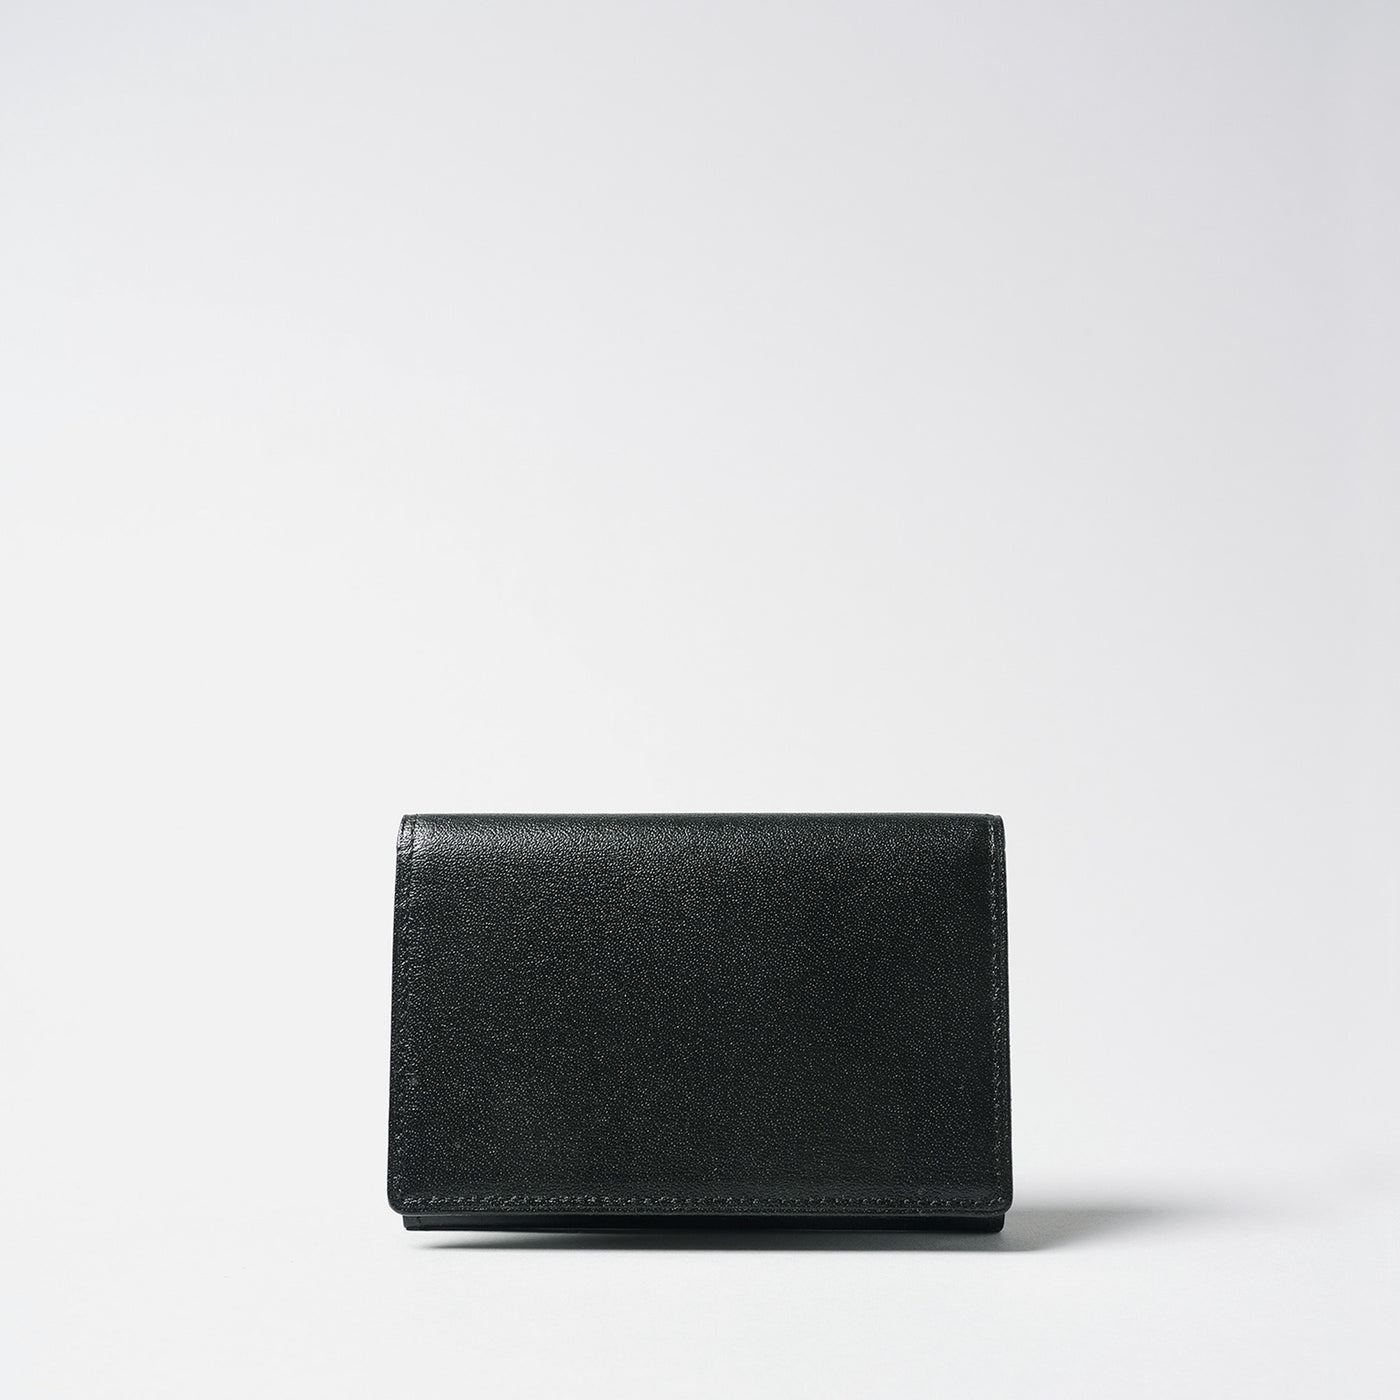 <Hawk Feathers> Kangaroo Business Card Holder with Gusset / Black